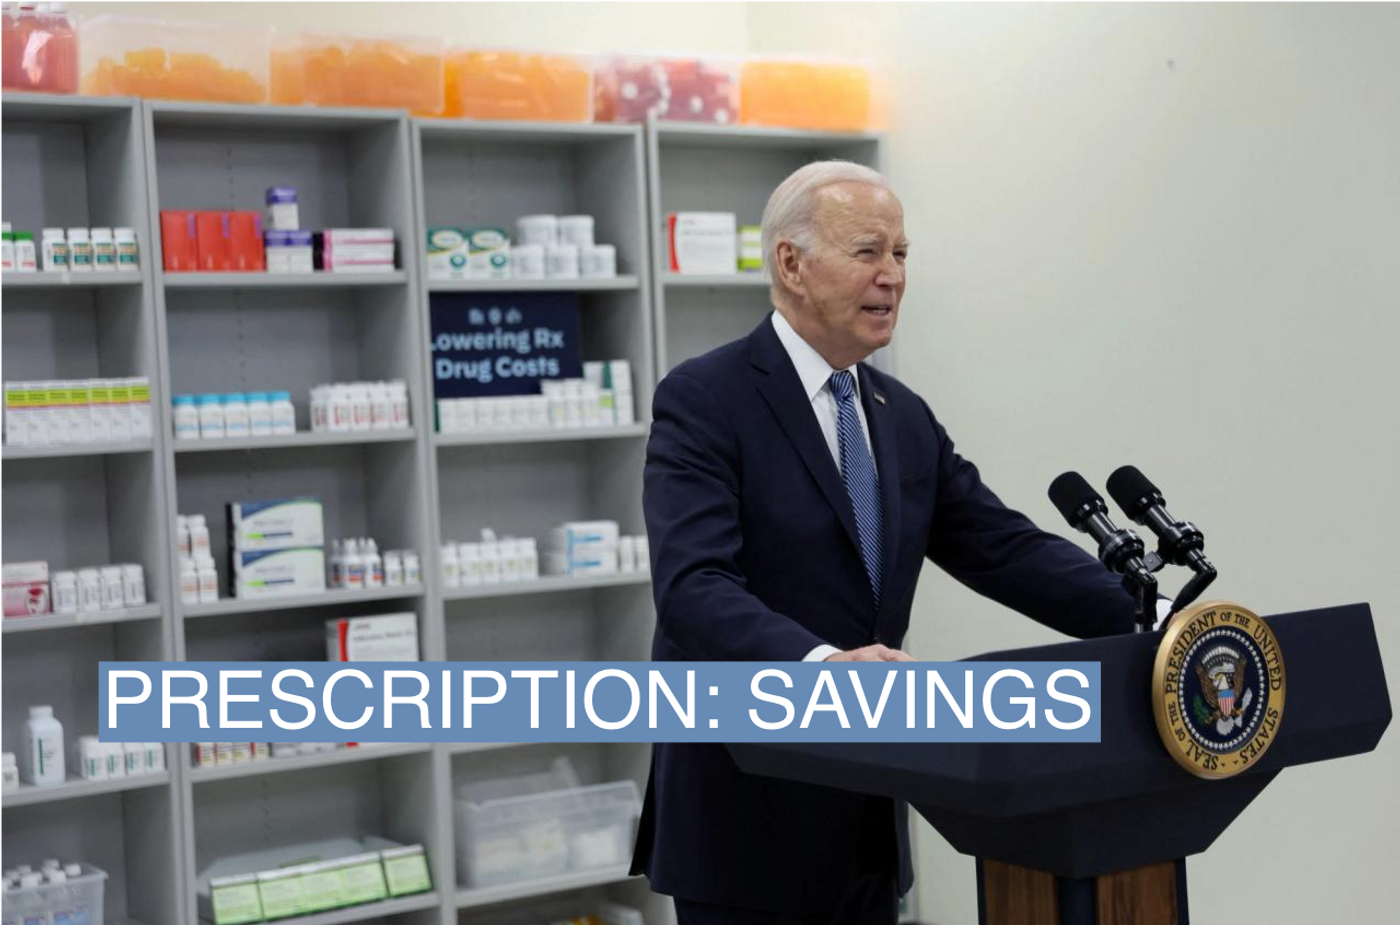 President Joe Biden delivers remarks about prescription drug costs during a visit to the National Institutes of Health in Bethesda, Md., on Dec. 14.